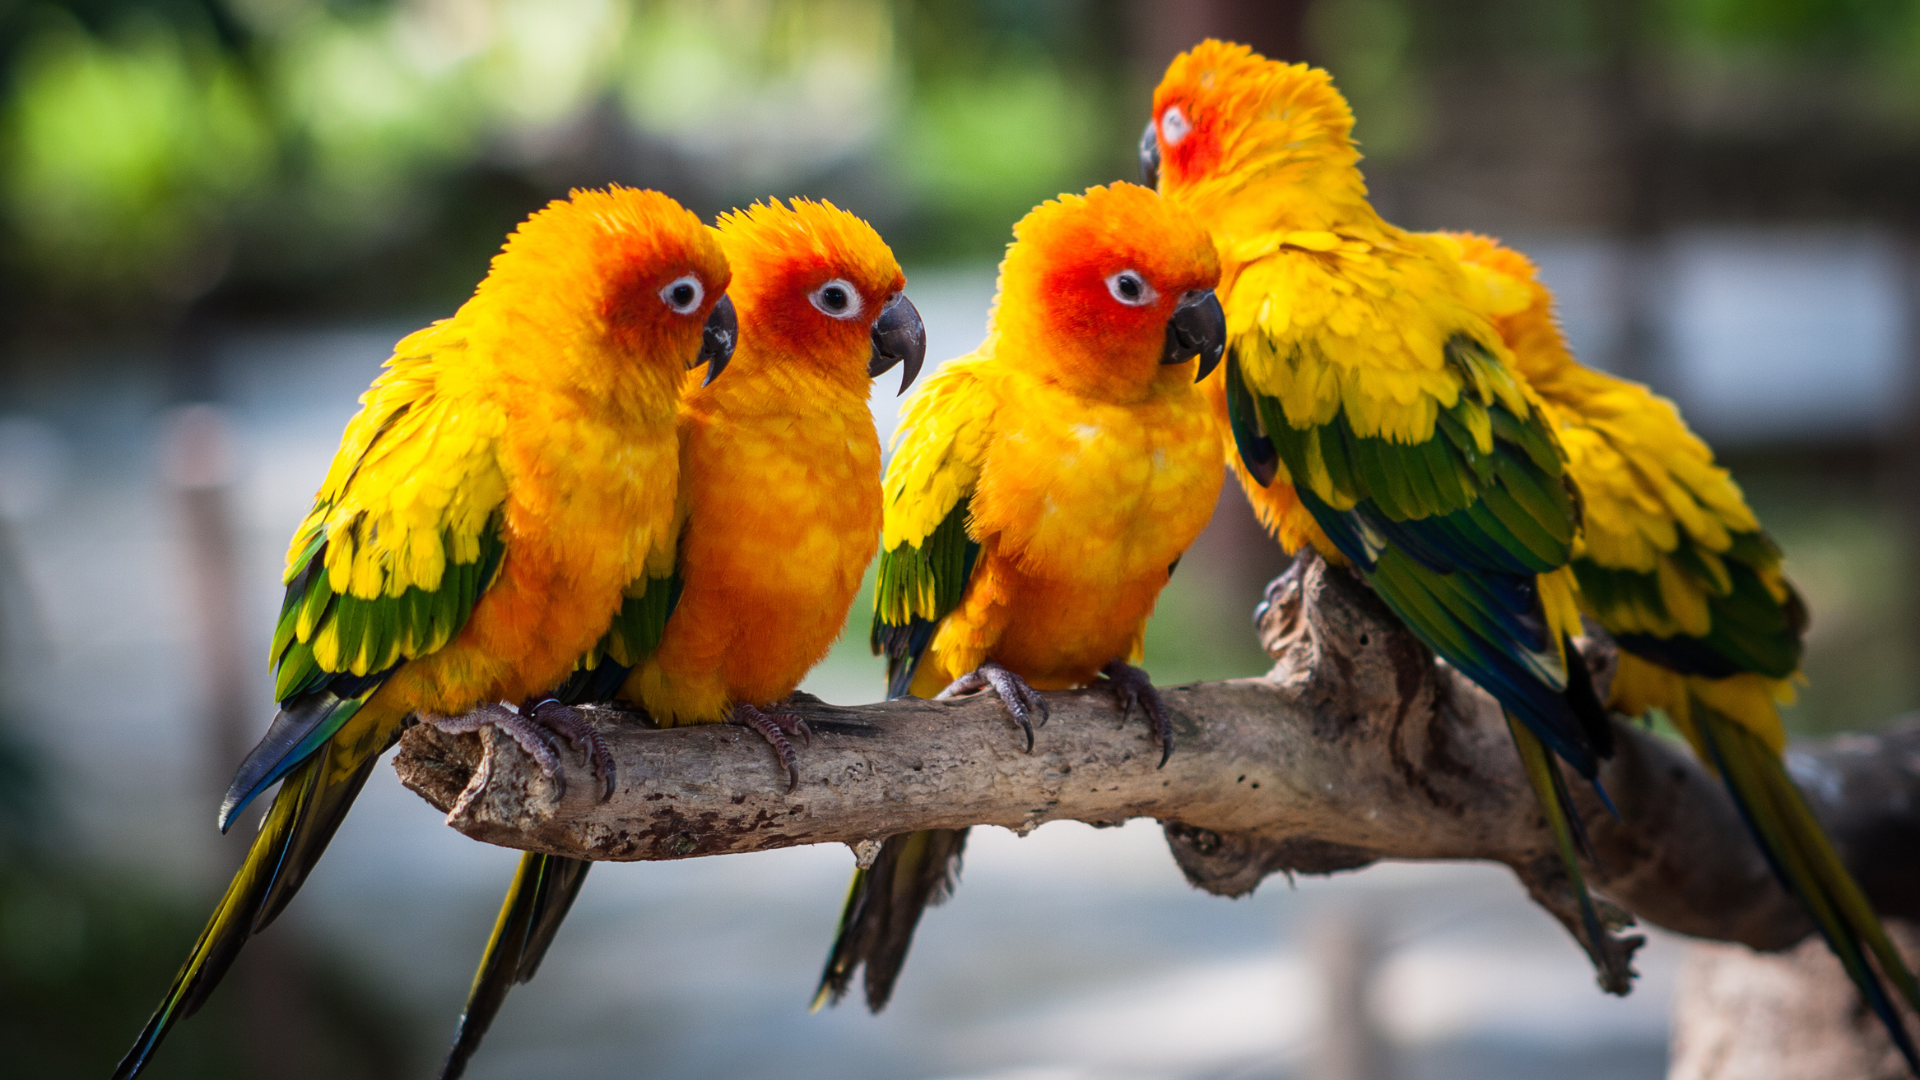 Yellow parrots perched on branch outside